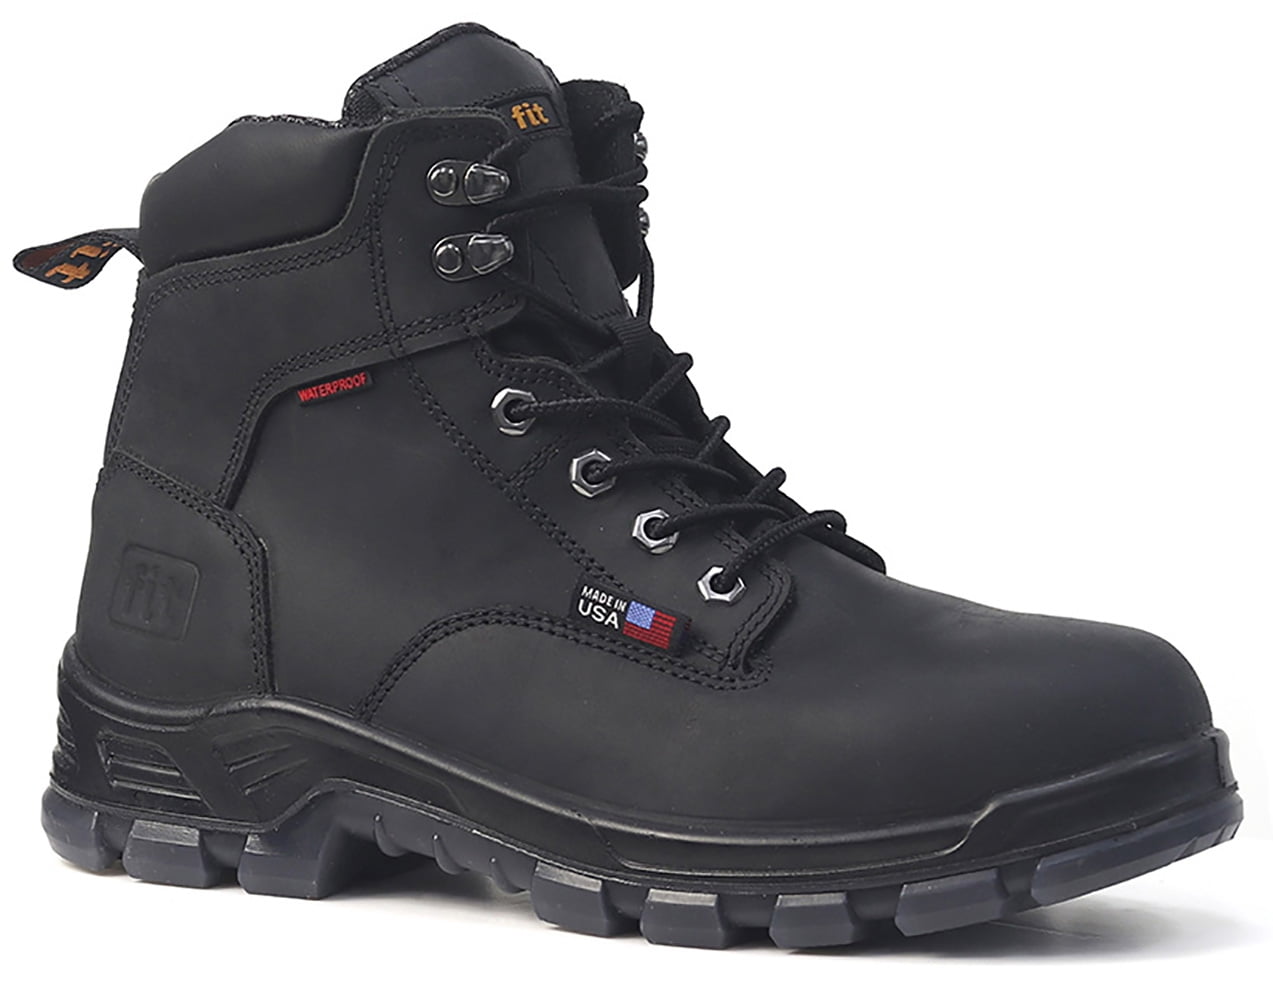 Mason, Black, Men's all leather, 6” steel toe safety boot, waterproof, electric shock protection, American made Walmart.com